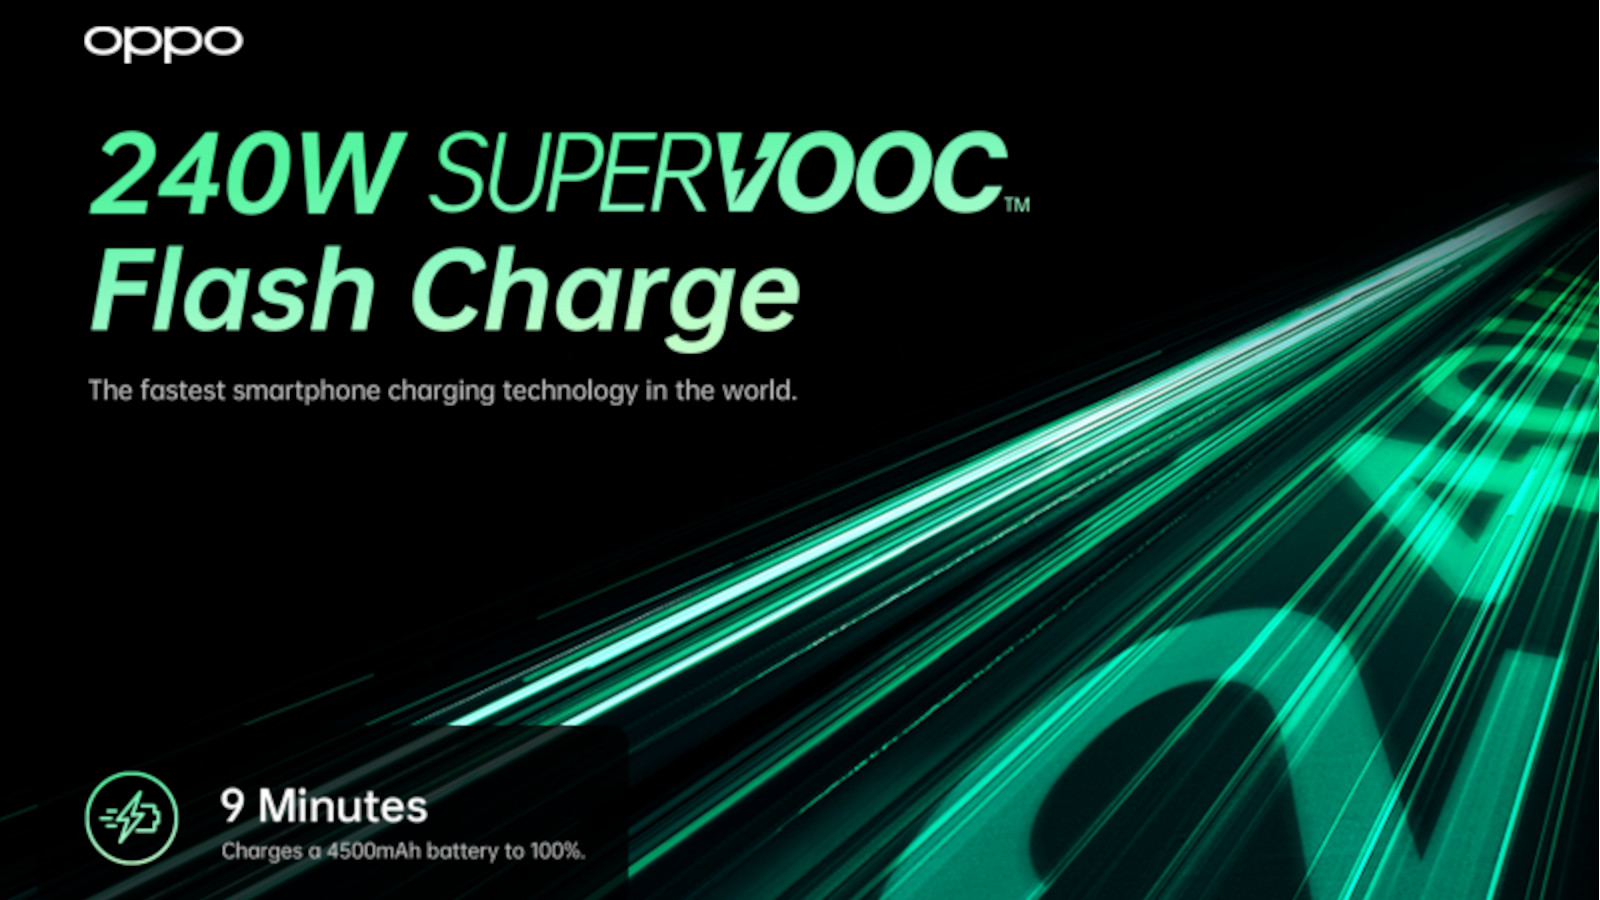 A graphic explaining Oppo's 240W superVOOC charging, including the claim of a 100% battery charge in nine minutes